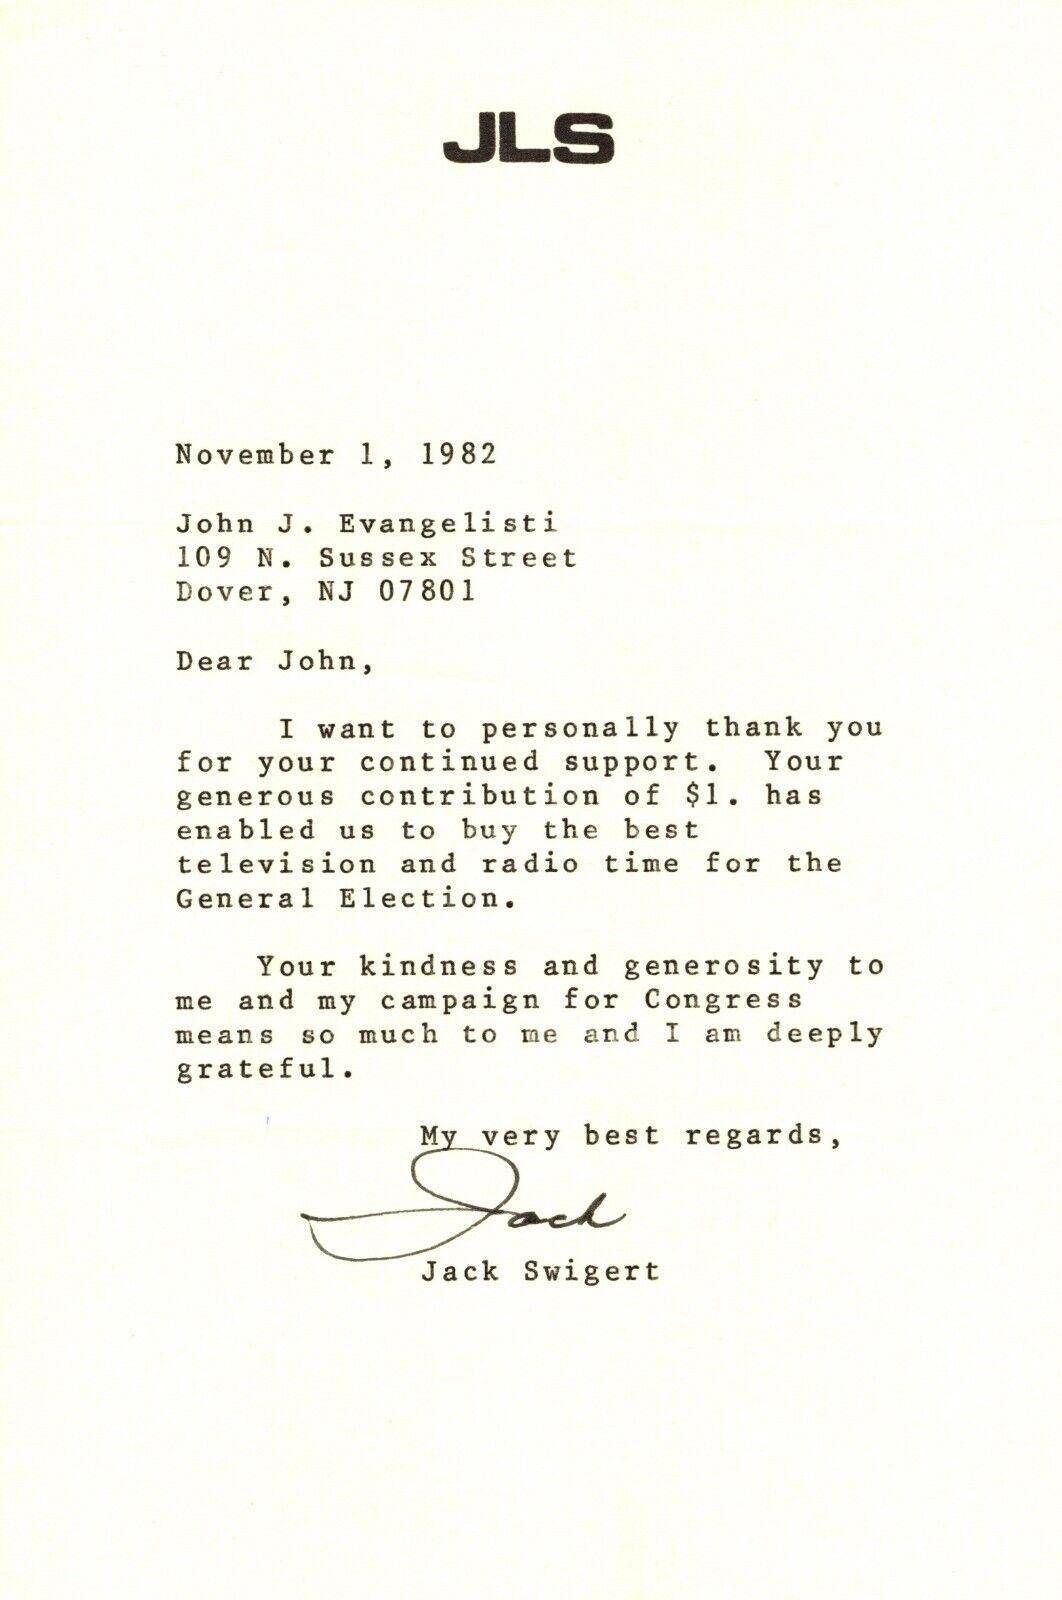 Jack Swigert - RARE Typed Letter Signed - Sent One Month Before His Death